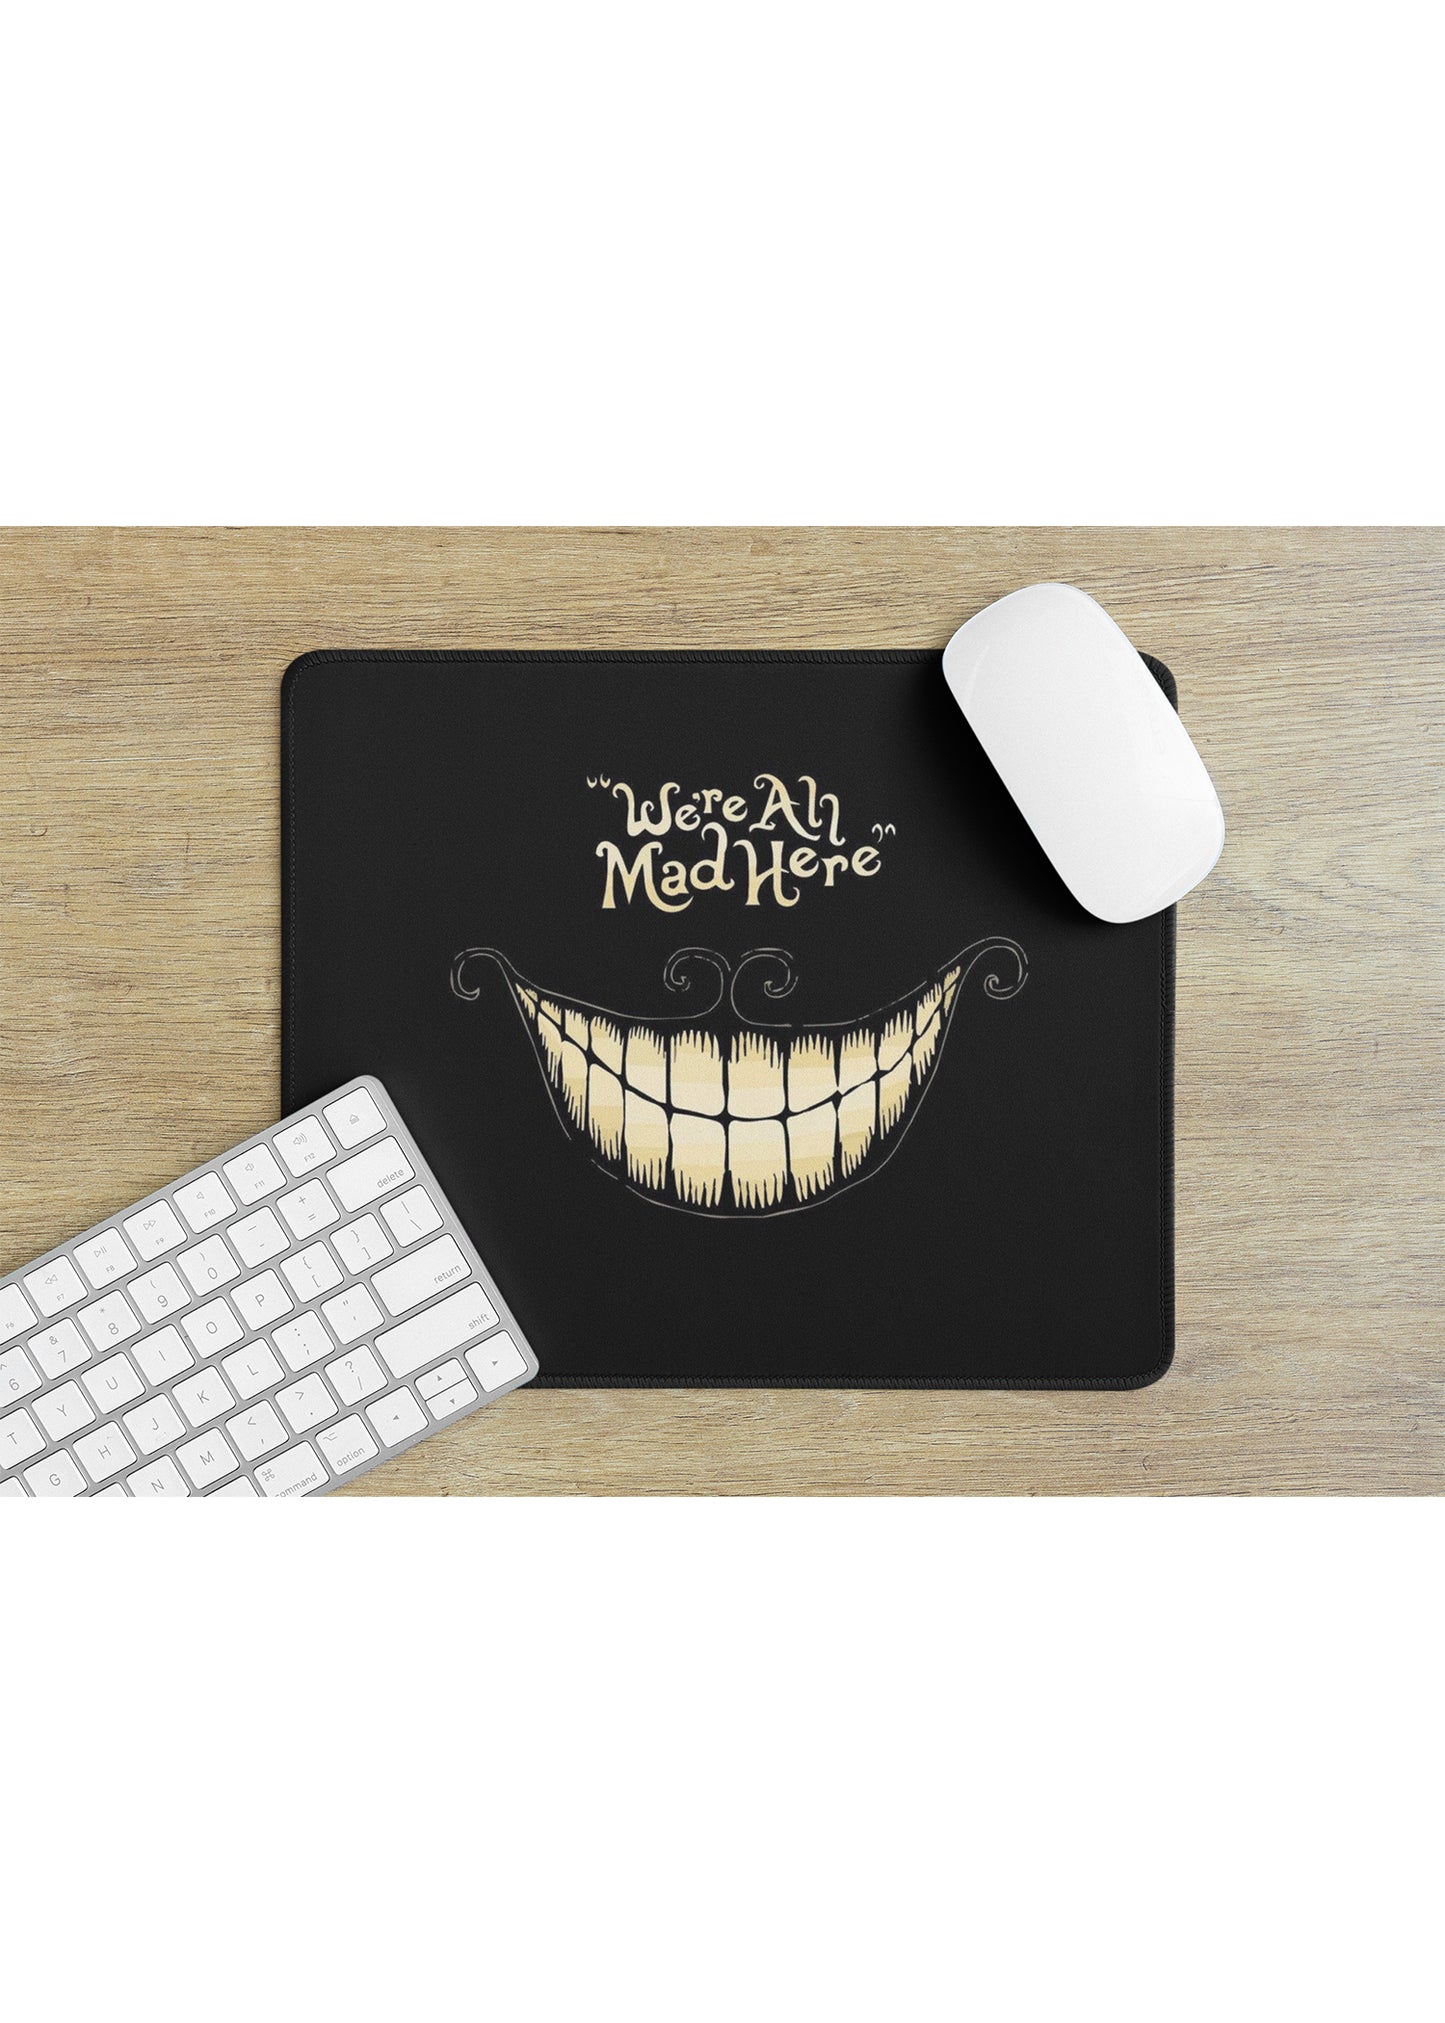 WE ARE MAD MOUSE PAD